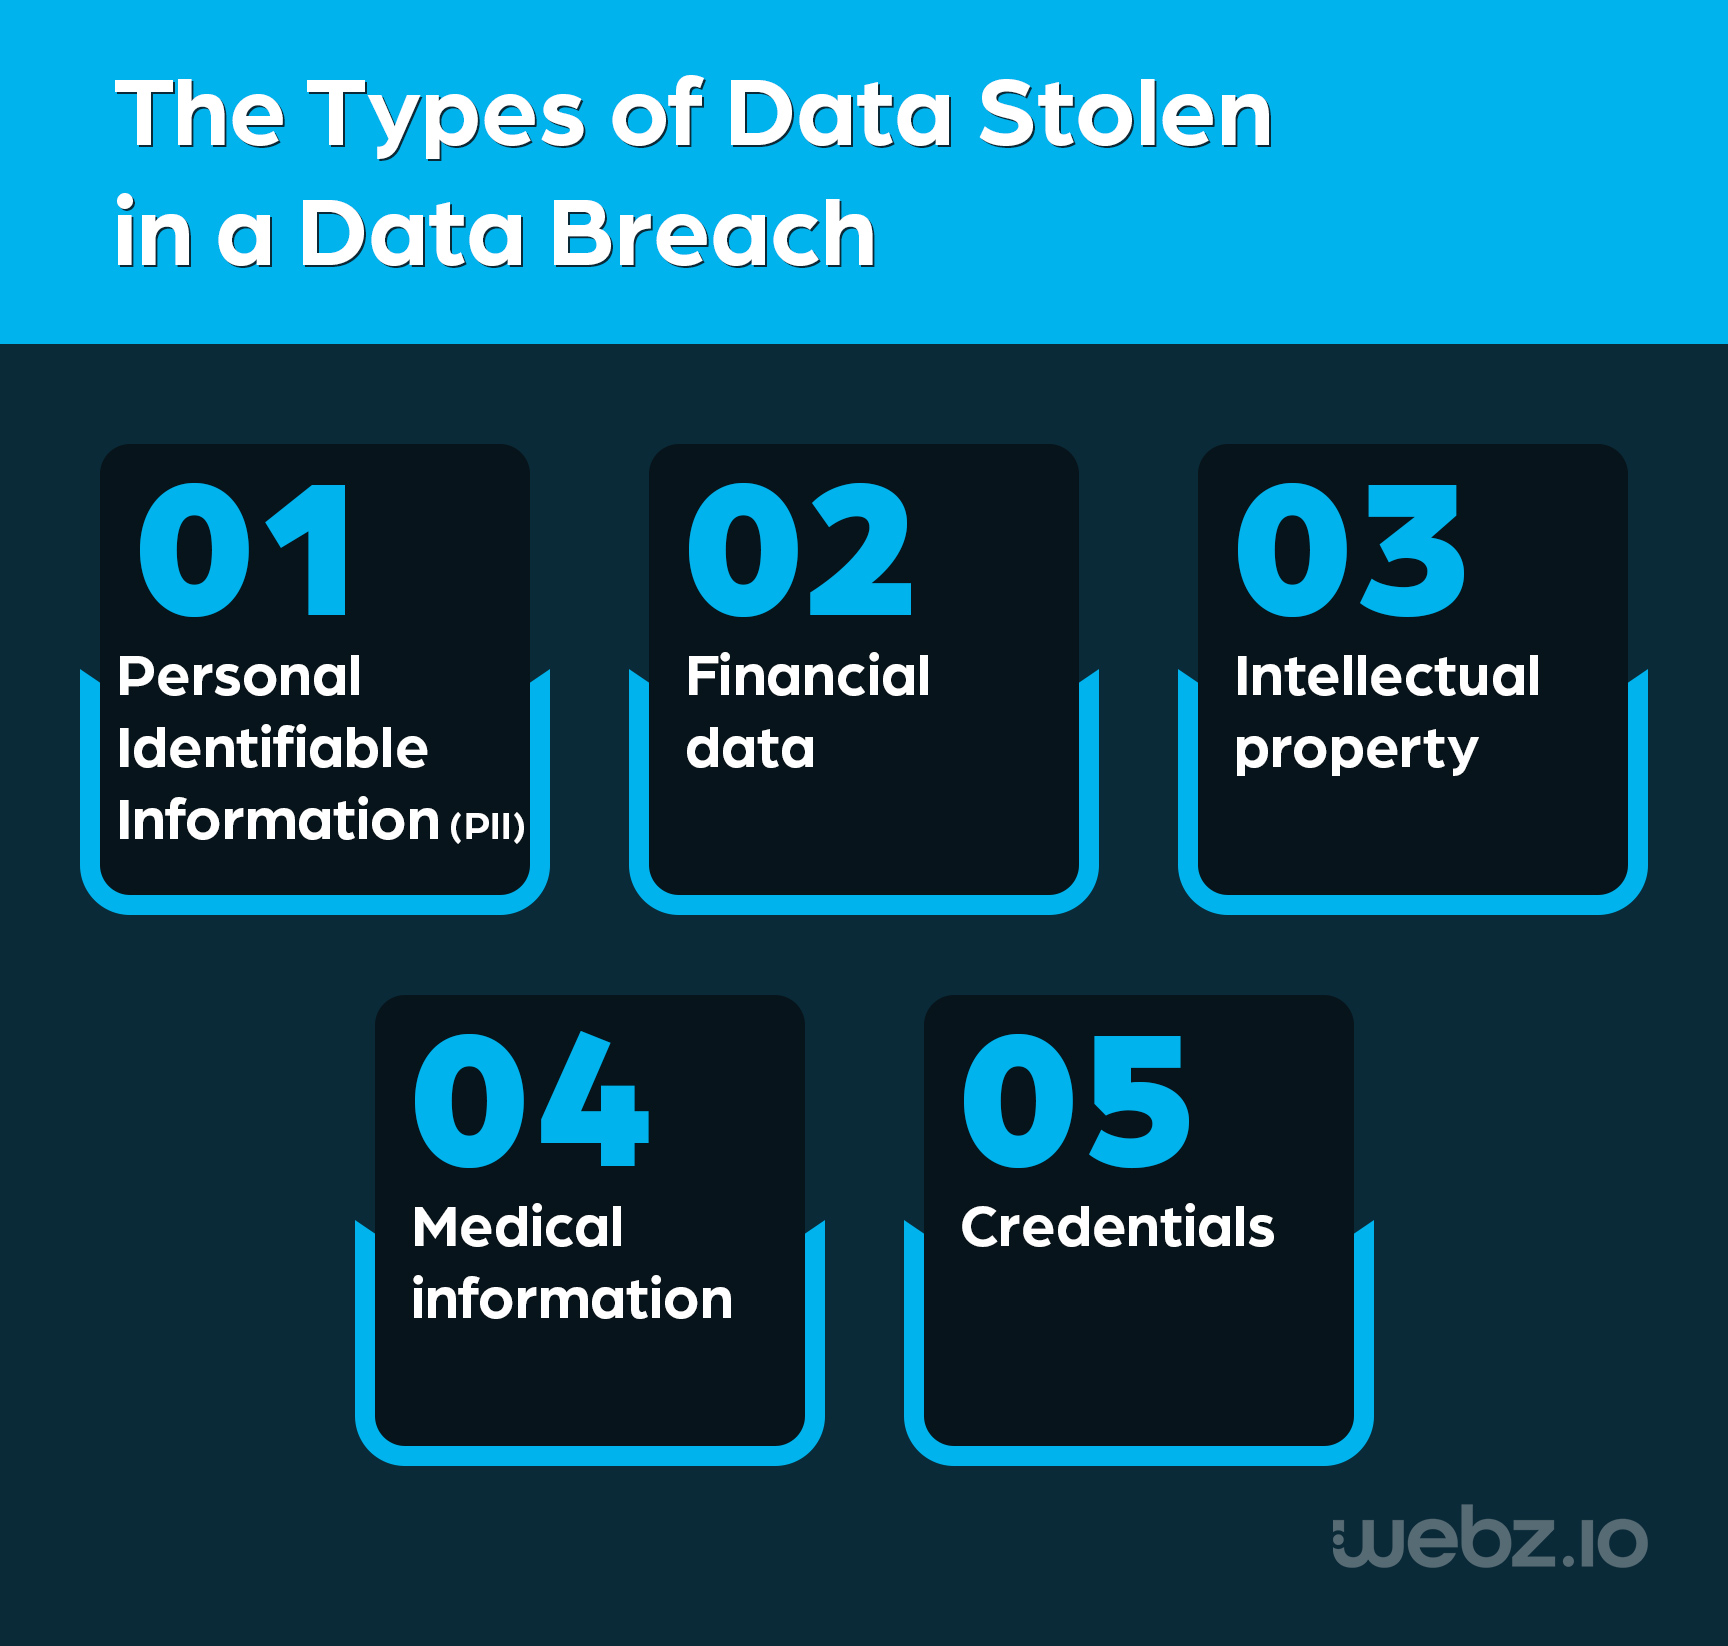 The types of data stolen in a data breach